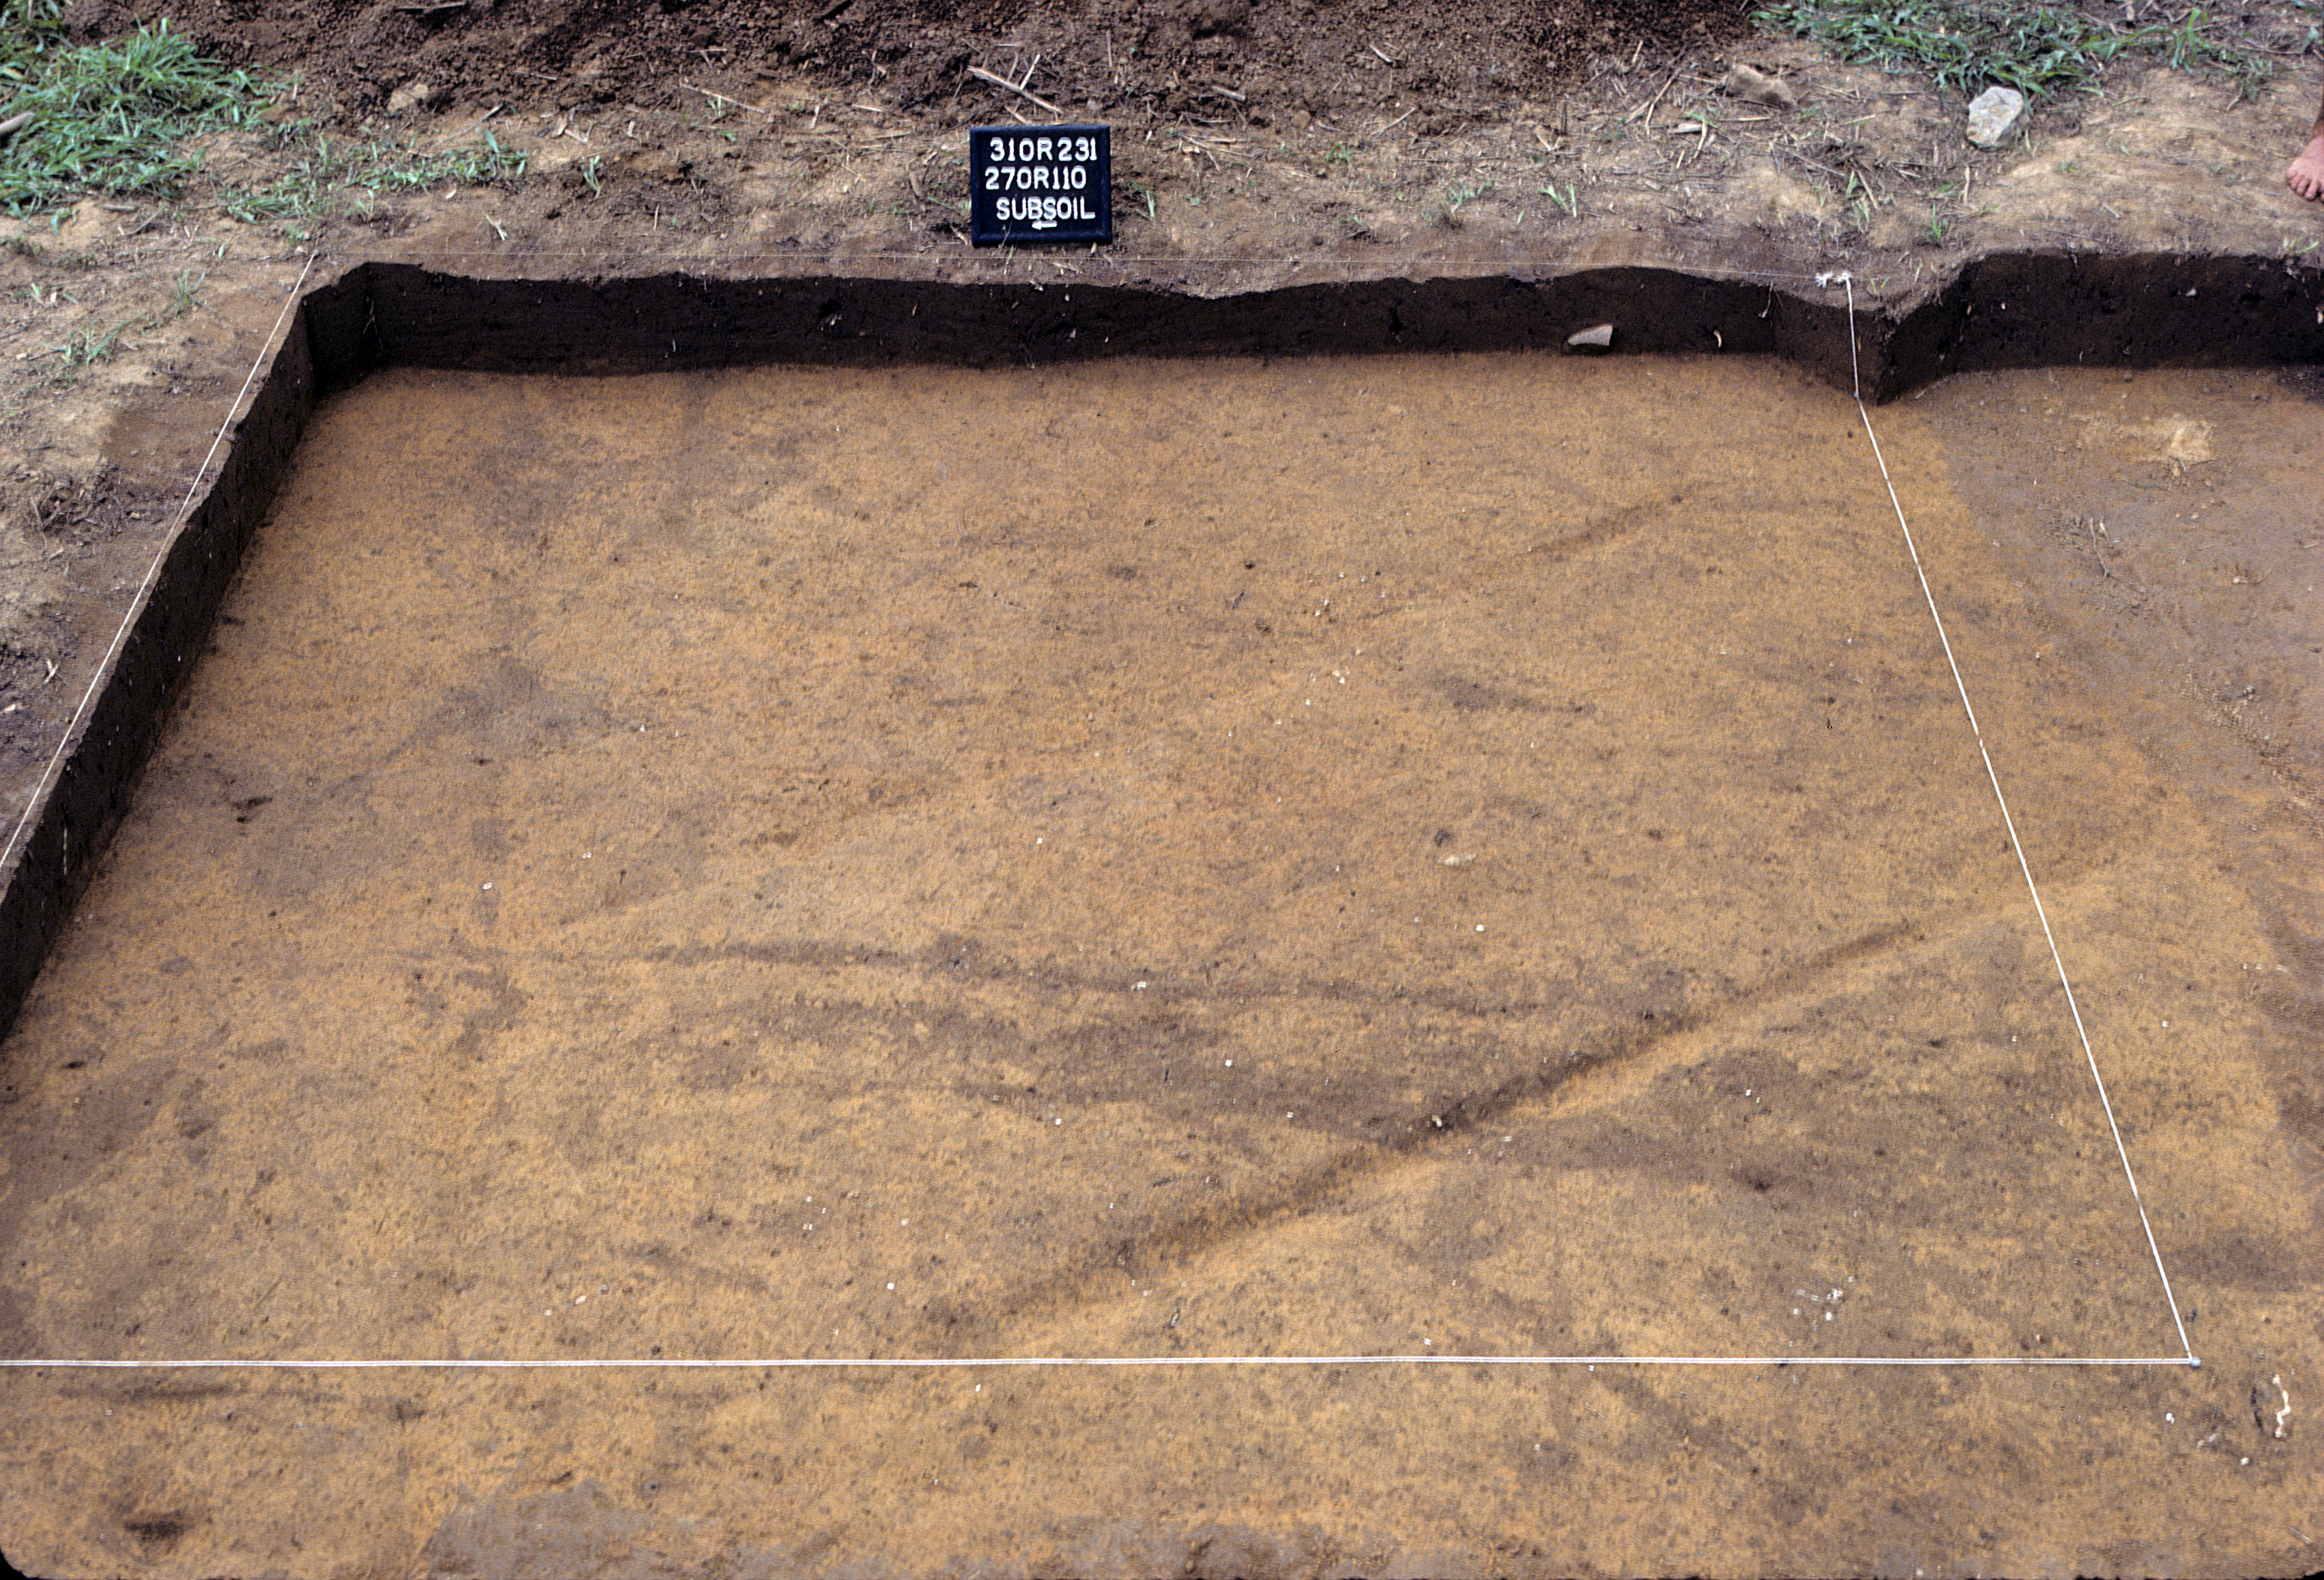 Figure 927. Sq. 270R110 at top of subsoil (view to east).